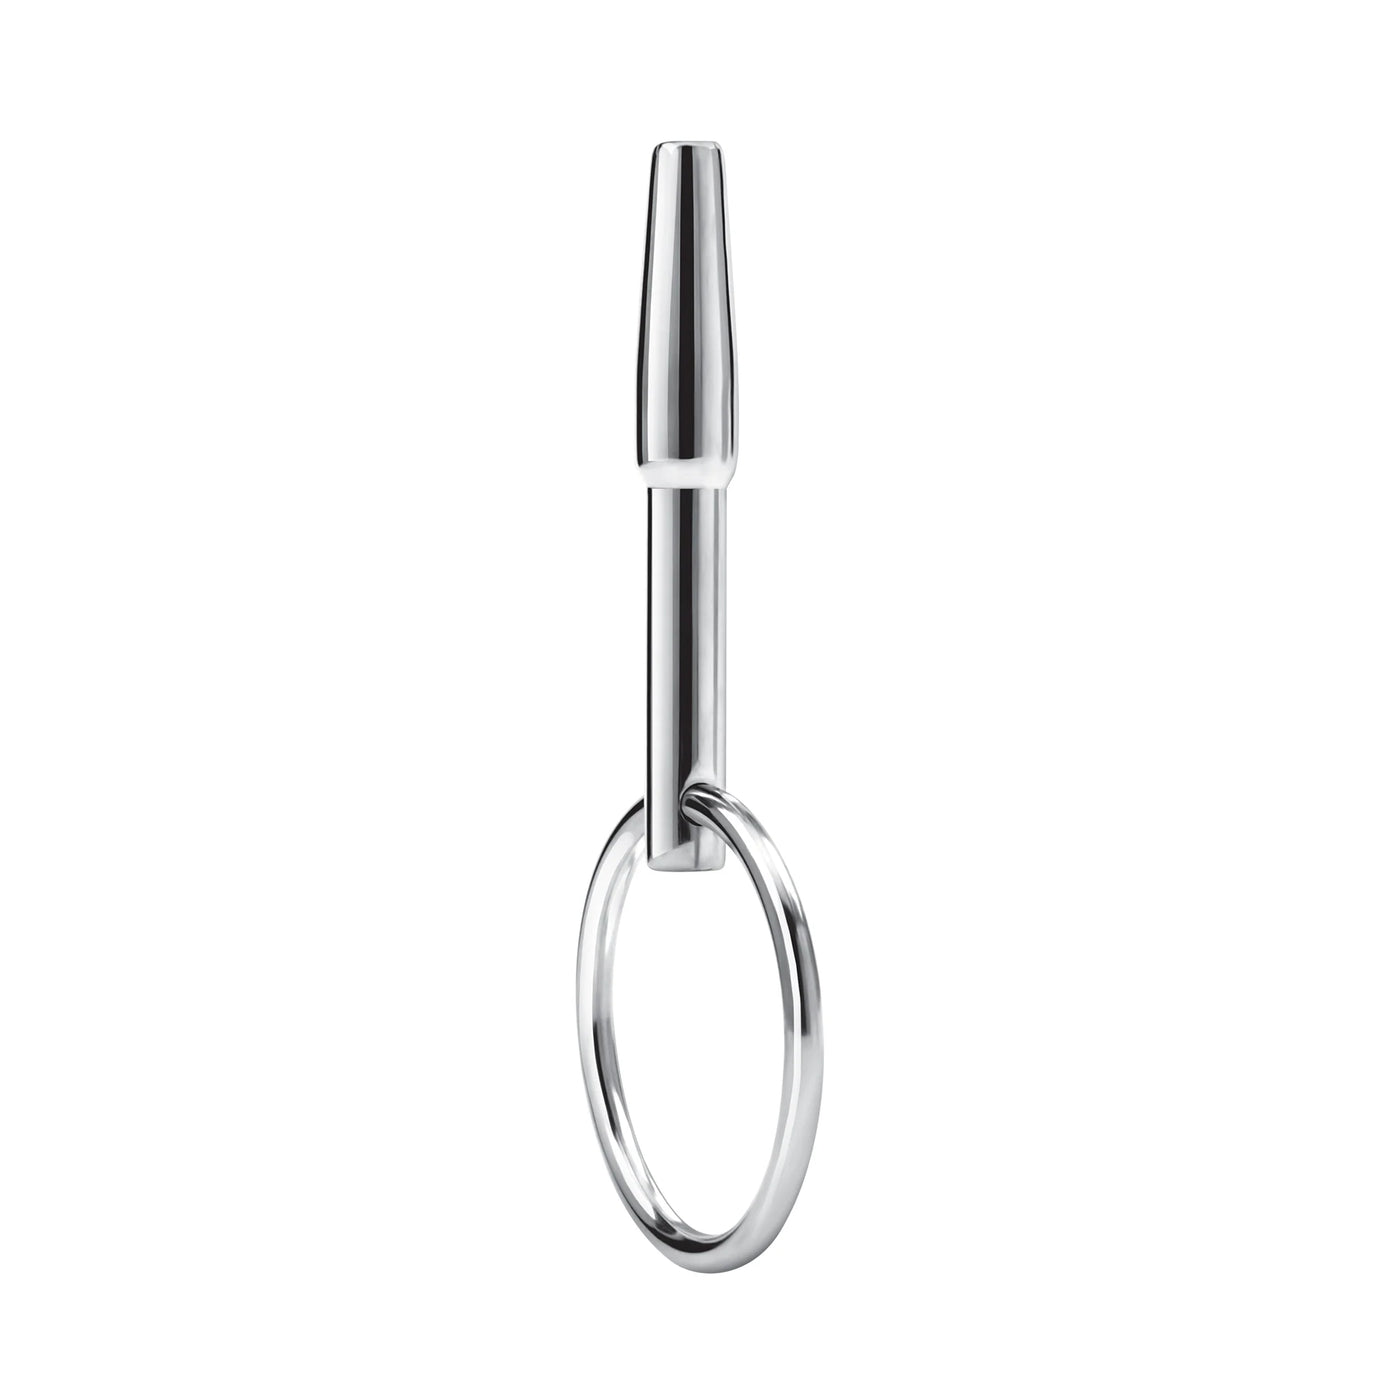 Blueline Hollow Penis Plug with Ring Urethral Probe, Stainless Steel - Hamilton Park Electronics